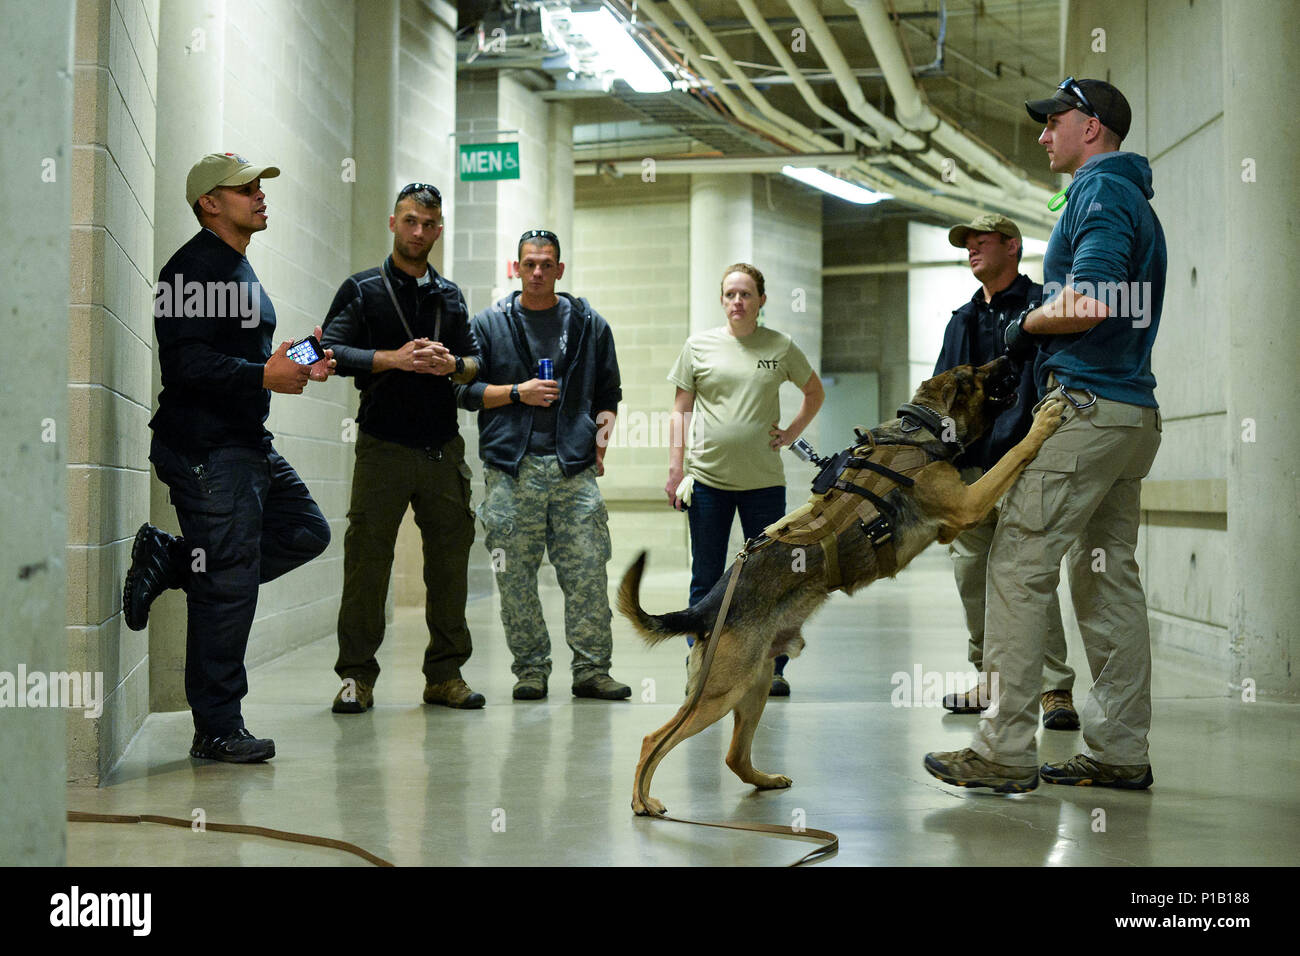 Bureau of Alcohol, Tobacco, Firearms and Explosives Special Agent Rennie Mora, left, talks with Staff Sgt. Joshua Rettschlag, 366th Security Forces Squadron, after completing homemade explosion detection testing Oct. 6 at Vivint Smart Home Arena, Salt Lake City. Airmen and their K-9 counterparts, along with dog teams from local, state and federal law enforcement agencies, received homemade explosives detection training from Bureau of Alcohol, Tobacco, Firearms and Explosives agents Oct. 5-6. (U.S. Air Force photo by R. Nial Bradshaw) Stock Photo